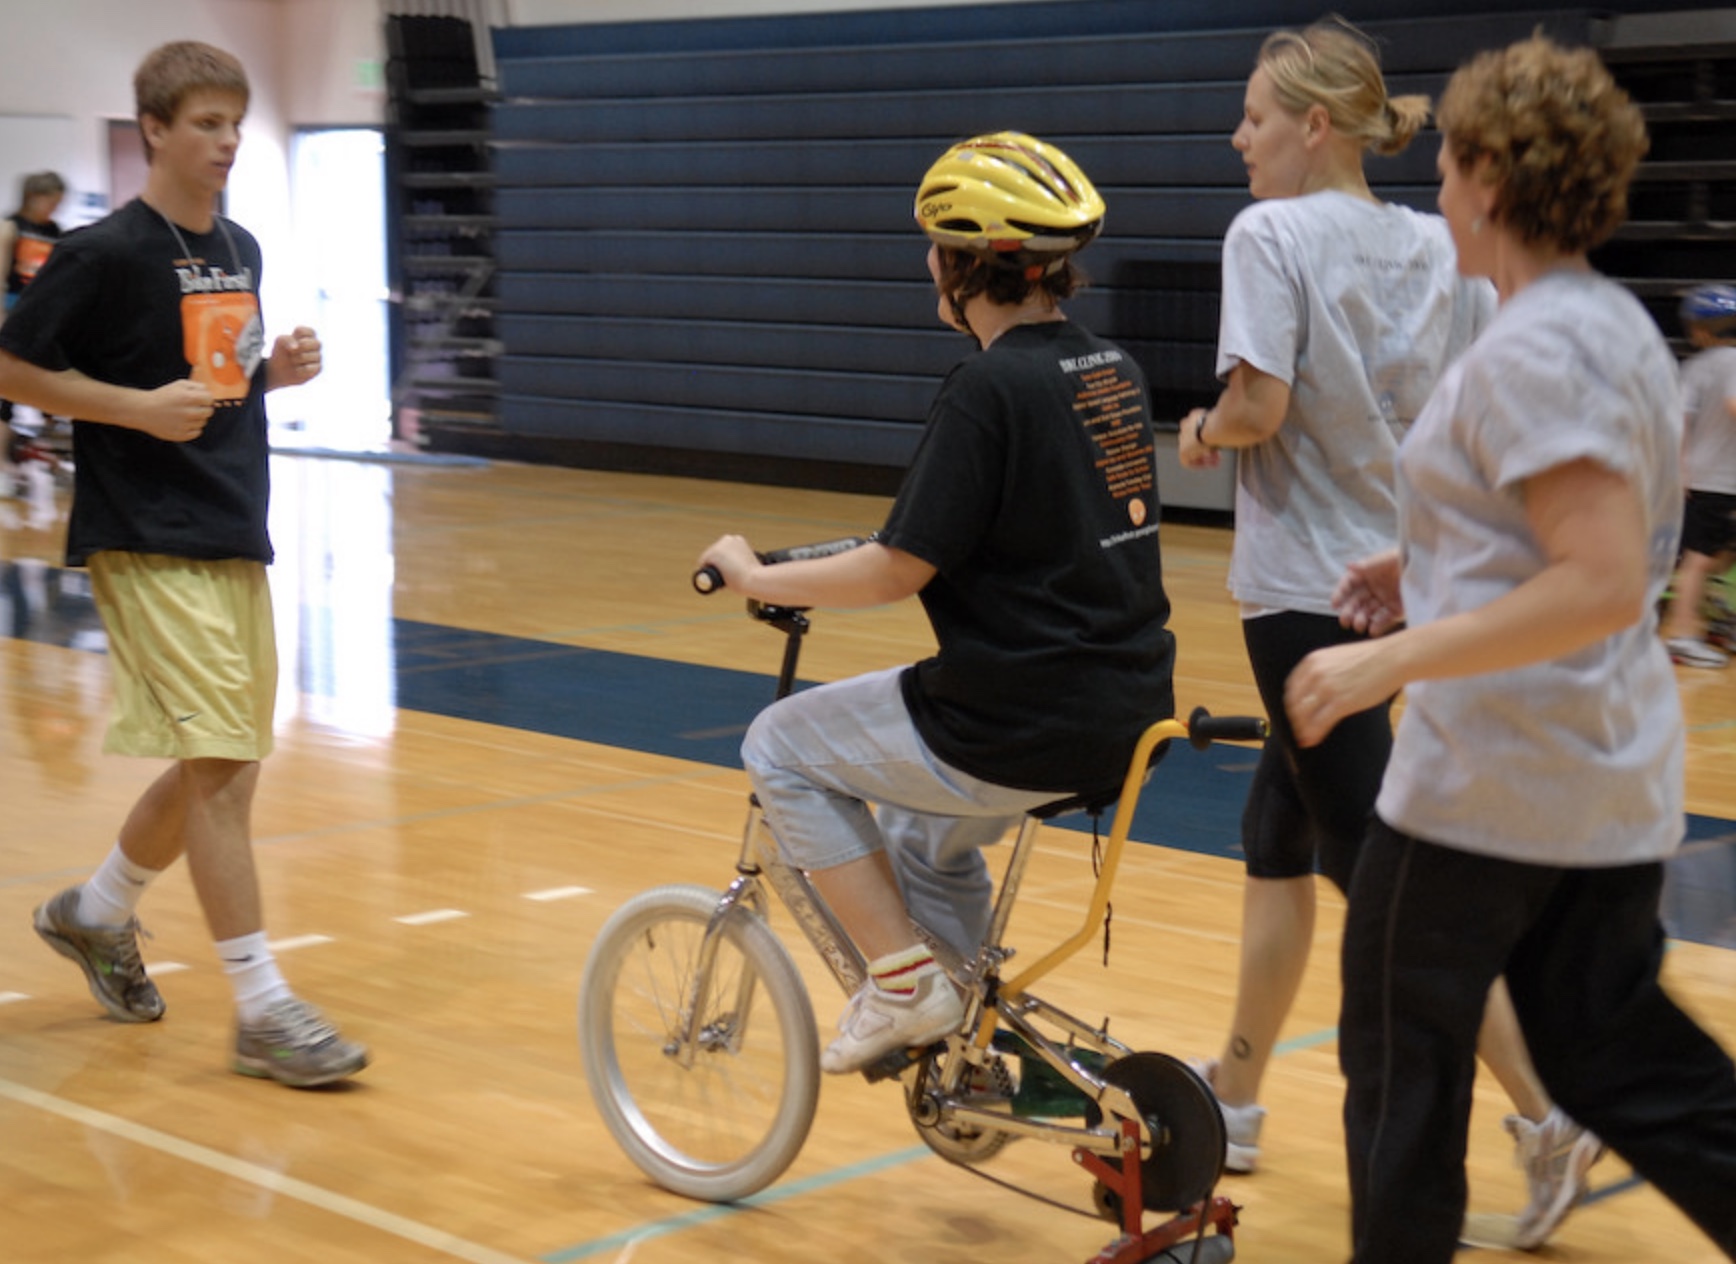 Person riding an adaptive bike in a gym with helpers running alongside them.